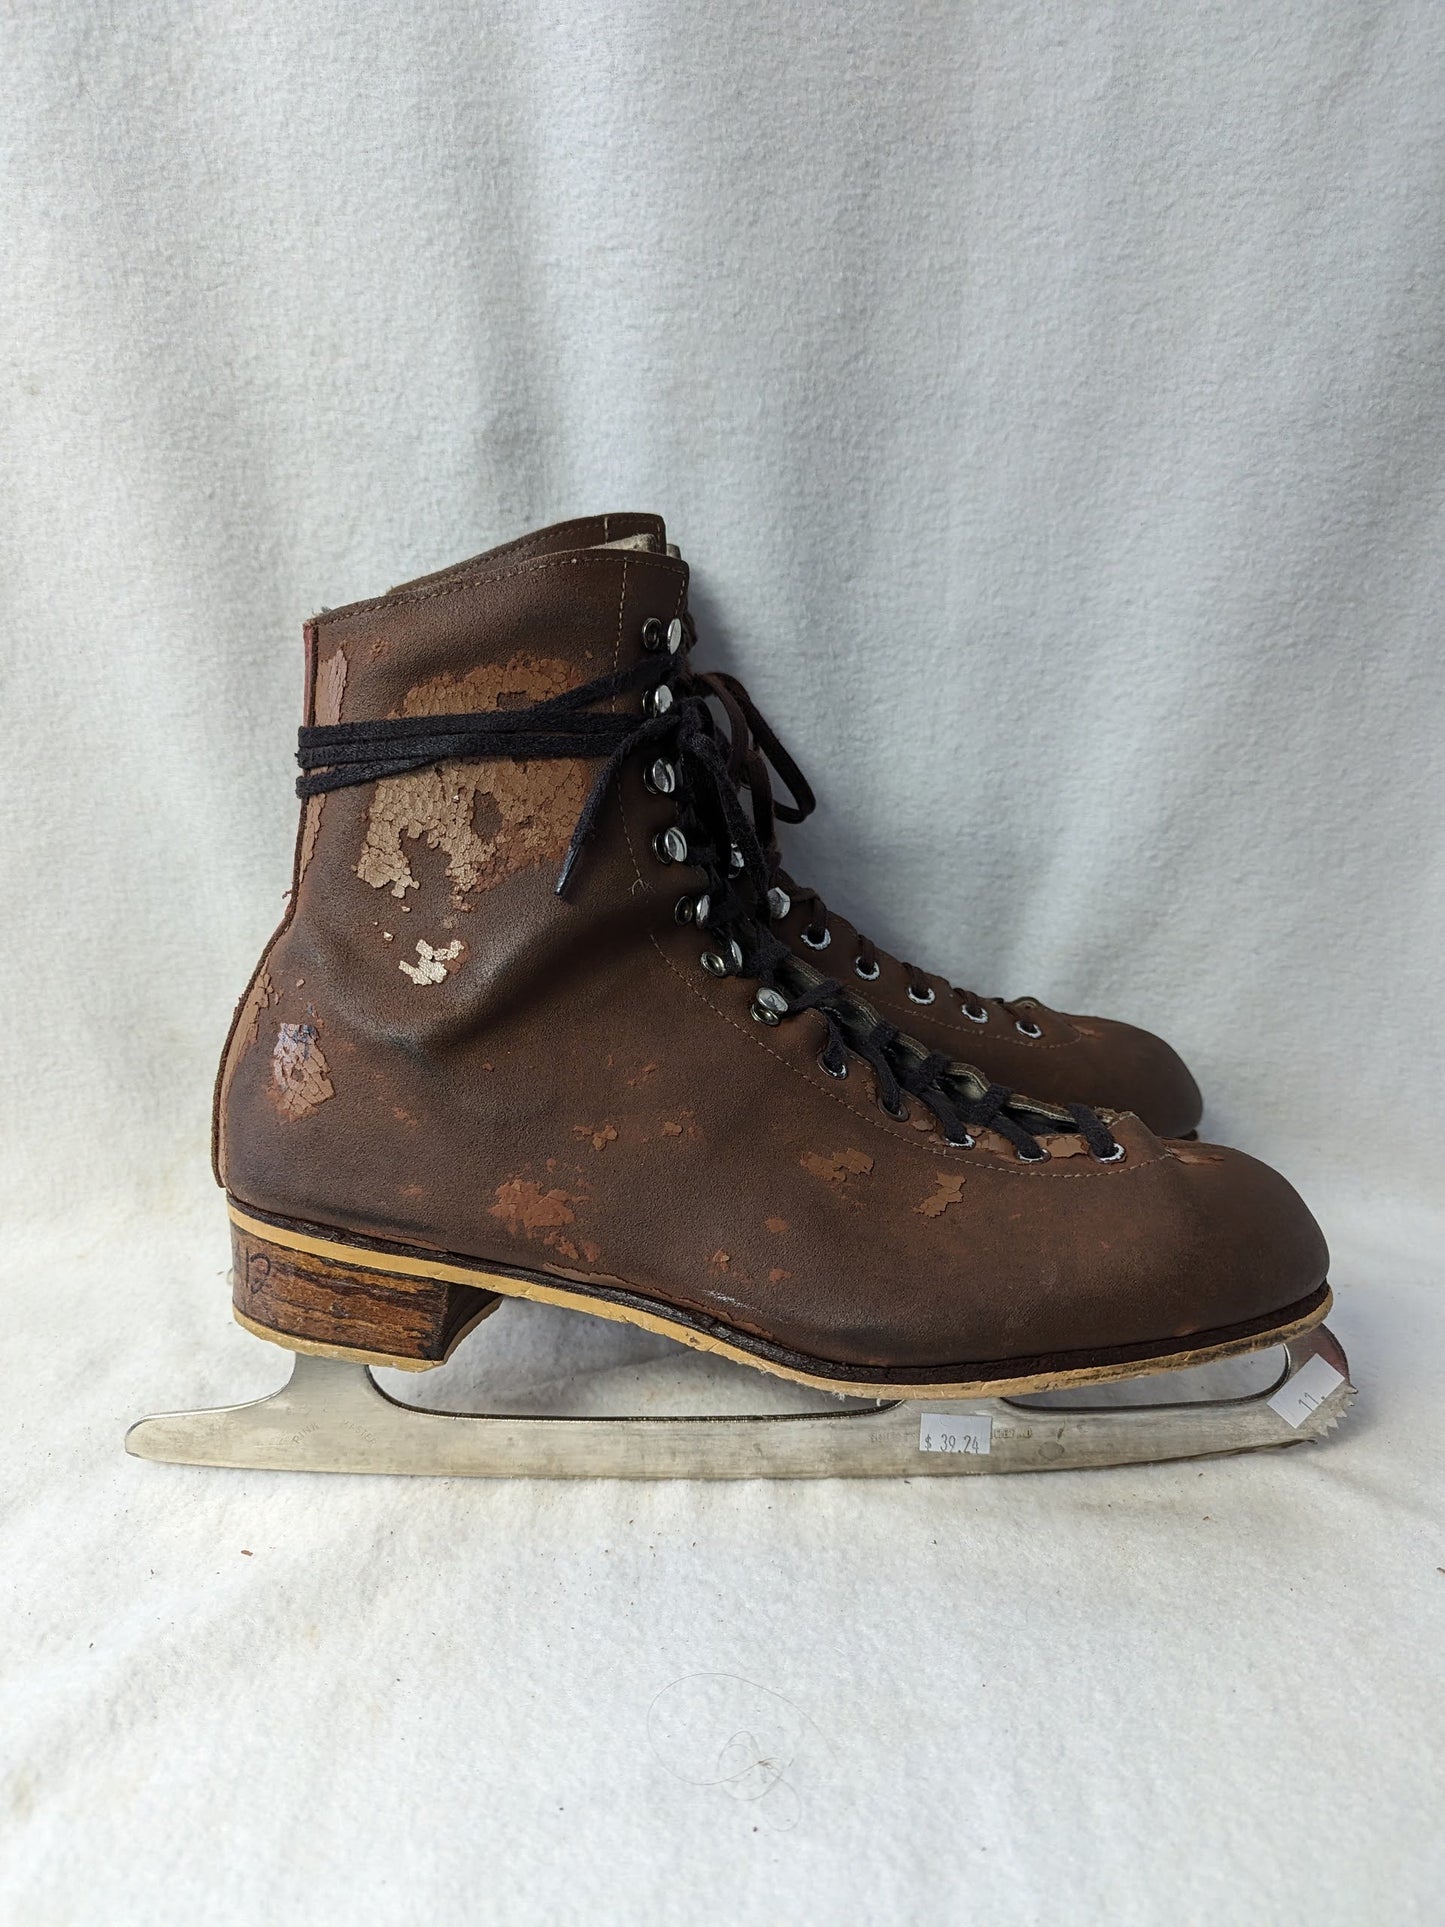 Rink Master Ice Skates Size 11 Color Brown Condition Used